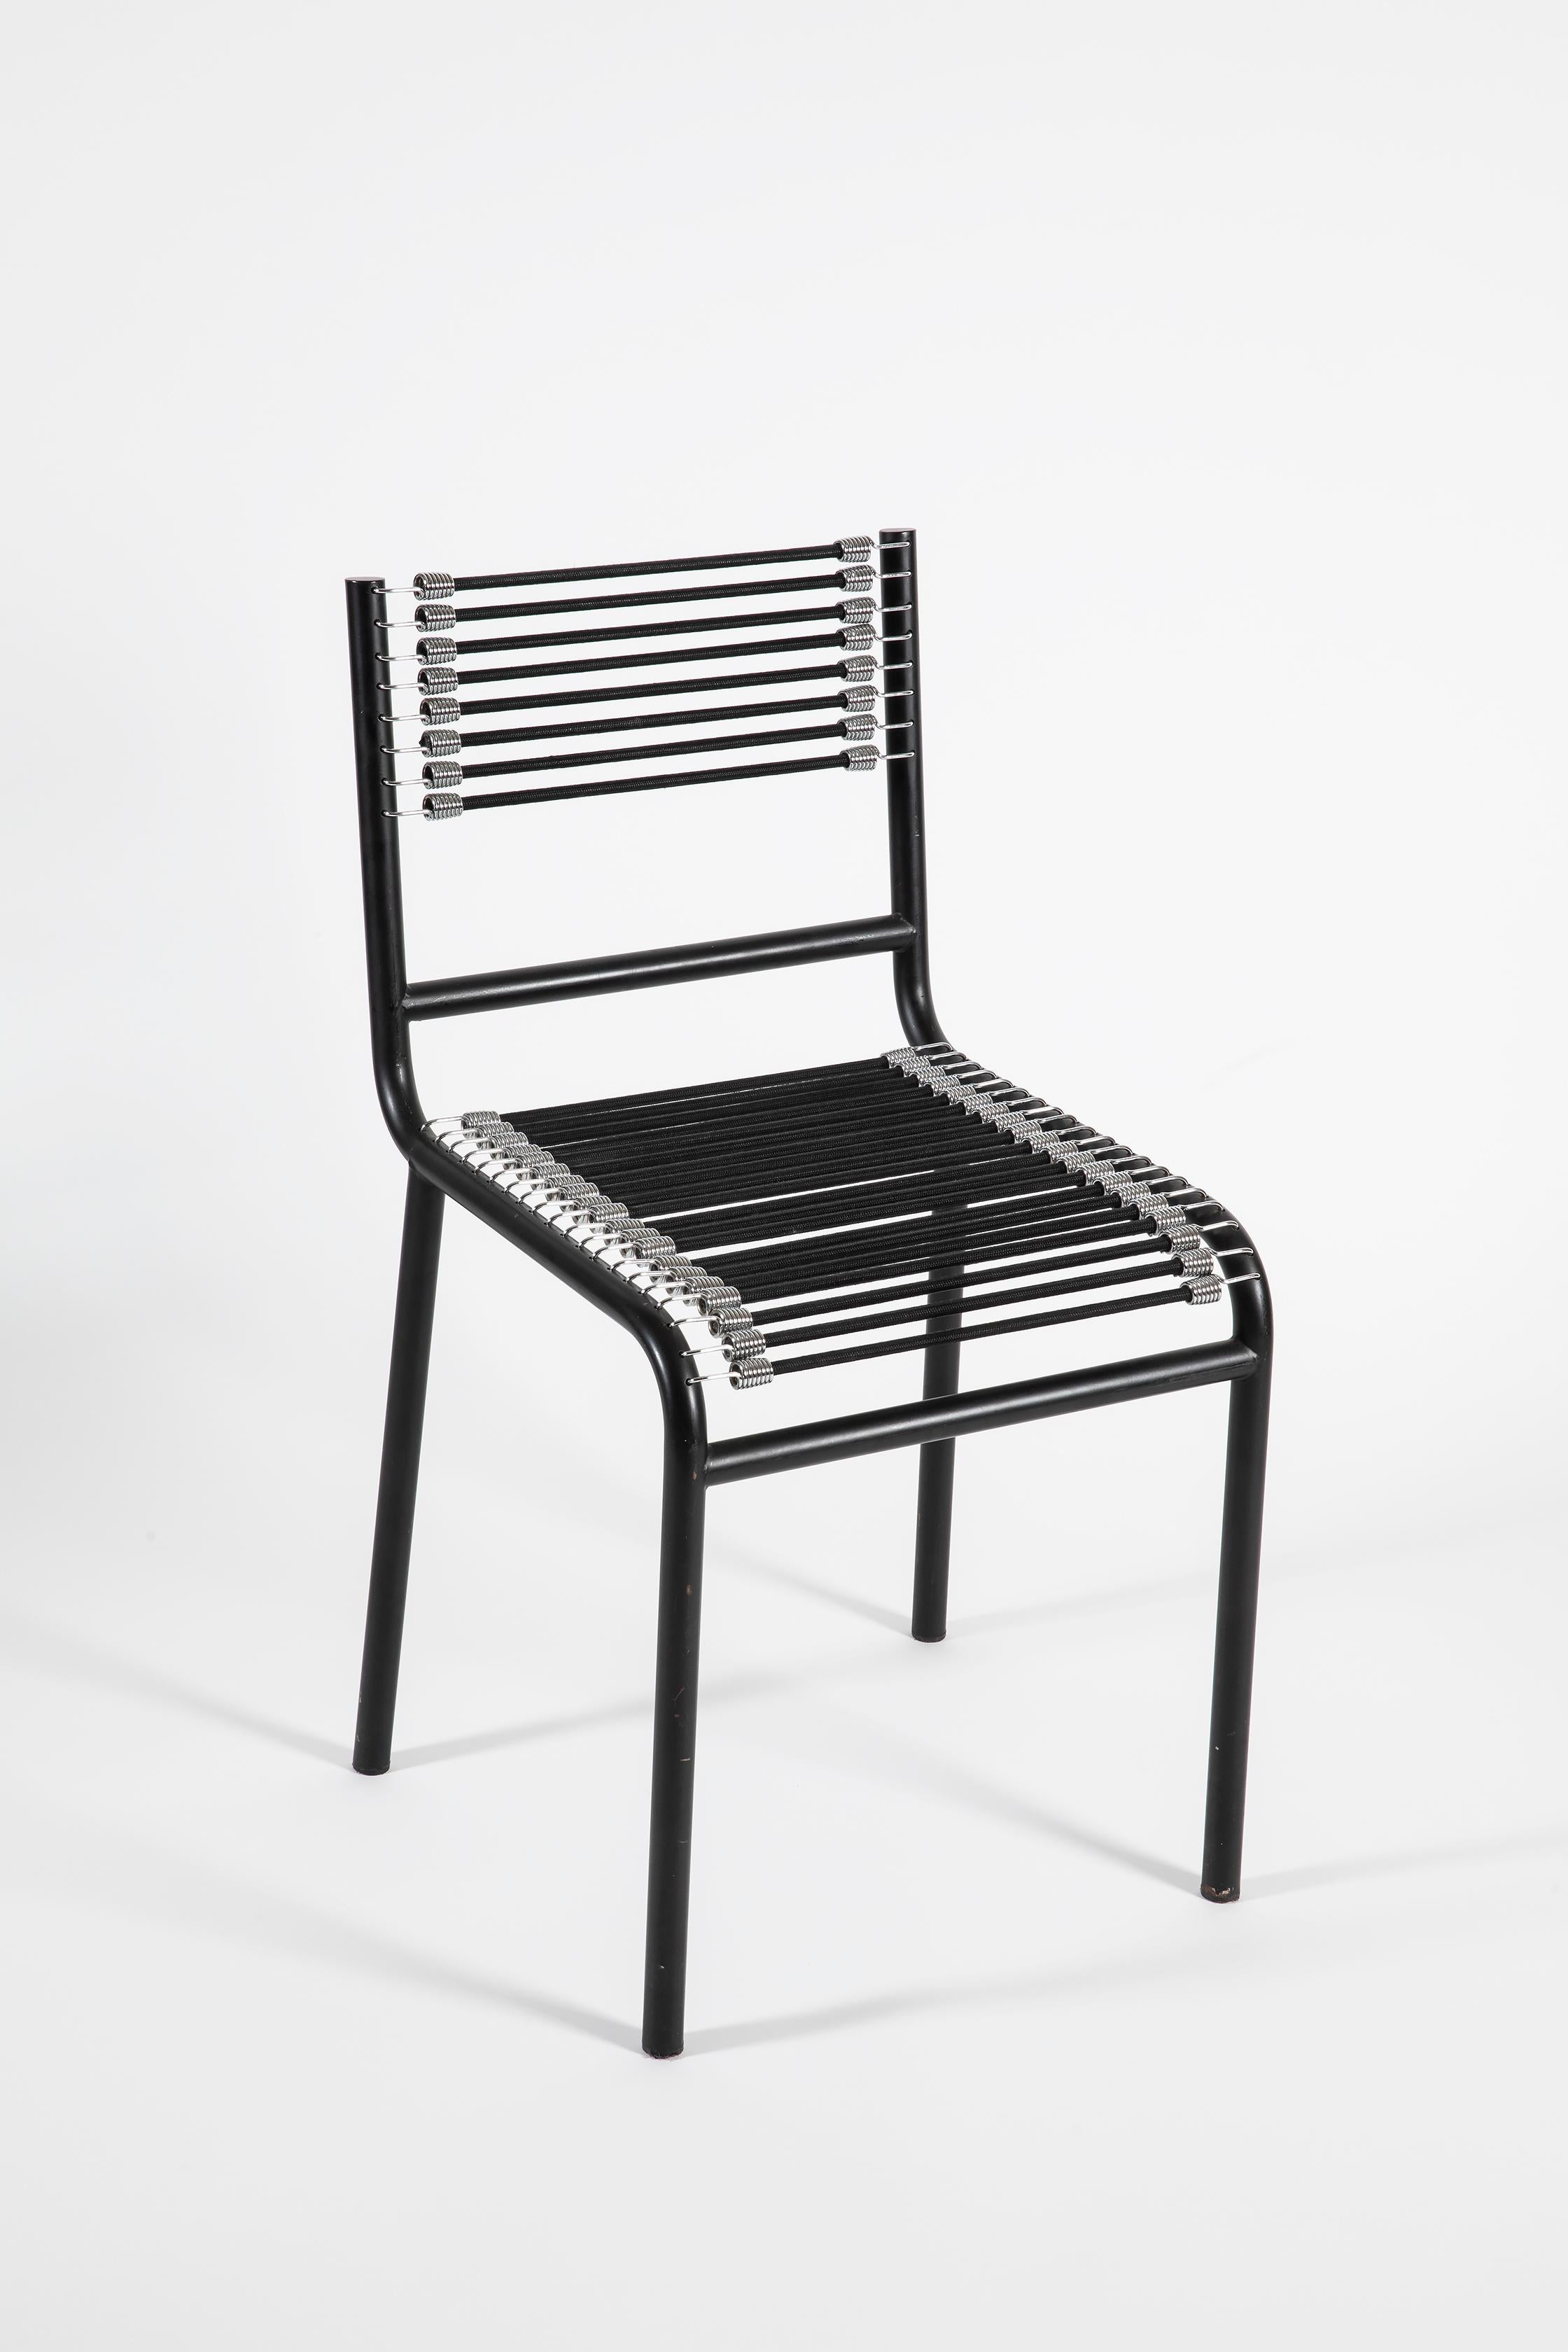 Set of four Sandow chairs by René Herbst. Structure in black lacquered steel tube and elastic rubber cord. The original design is dated 1928 and introduced at the Salon d' Automne in 1929. In 1980s the famous Italian factory Pallucco made this